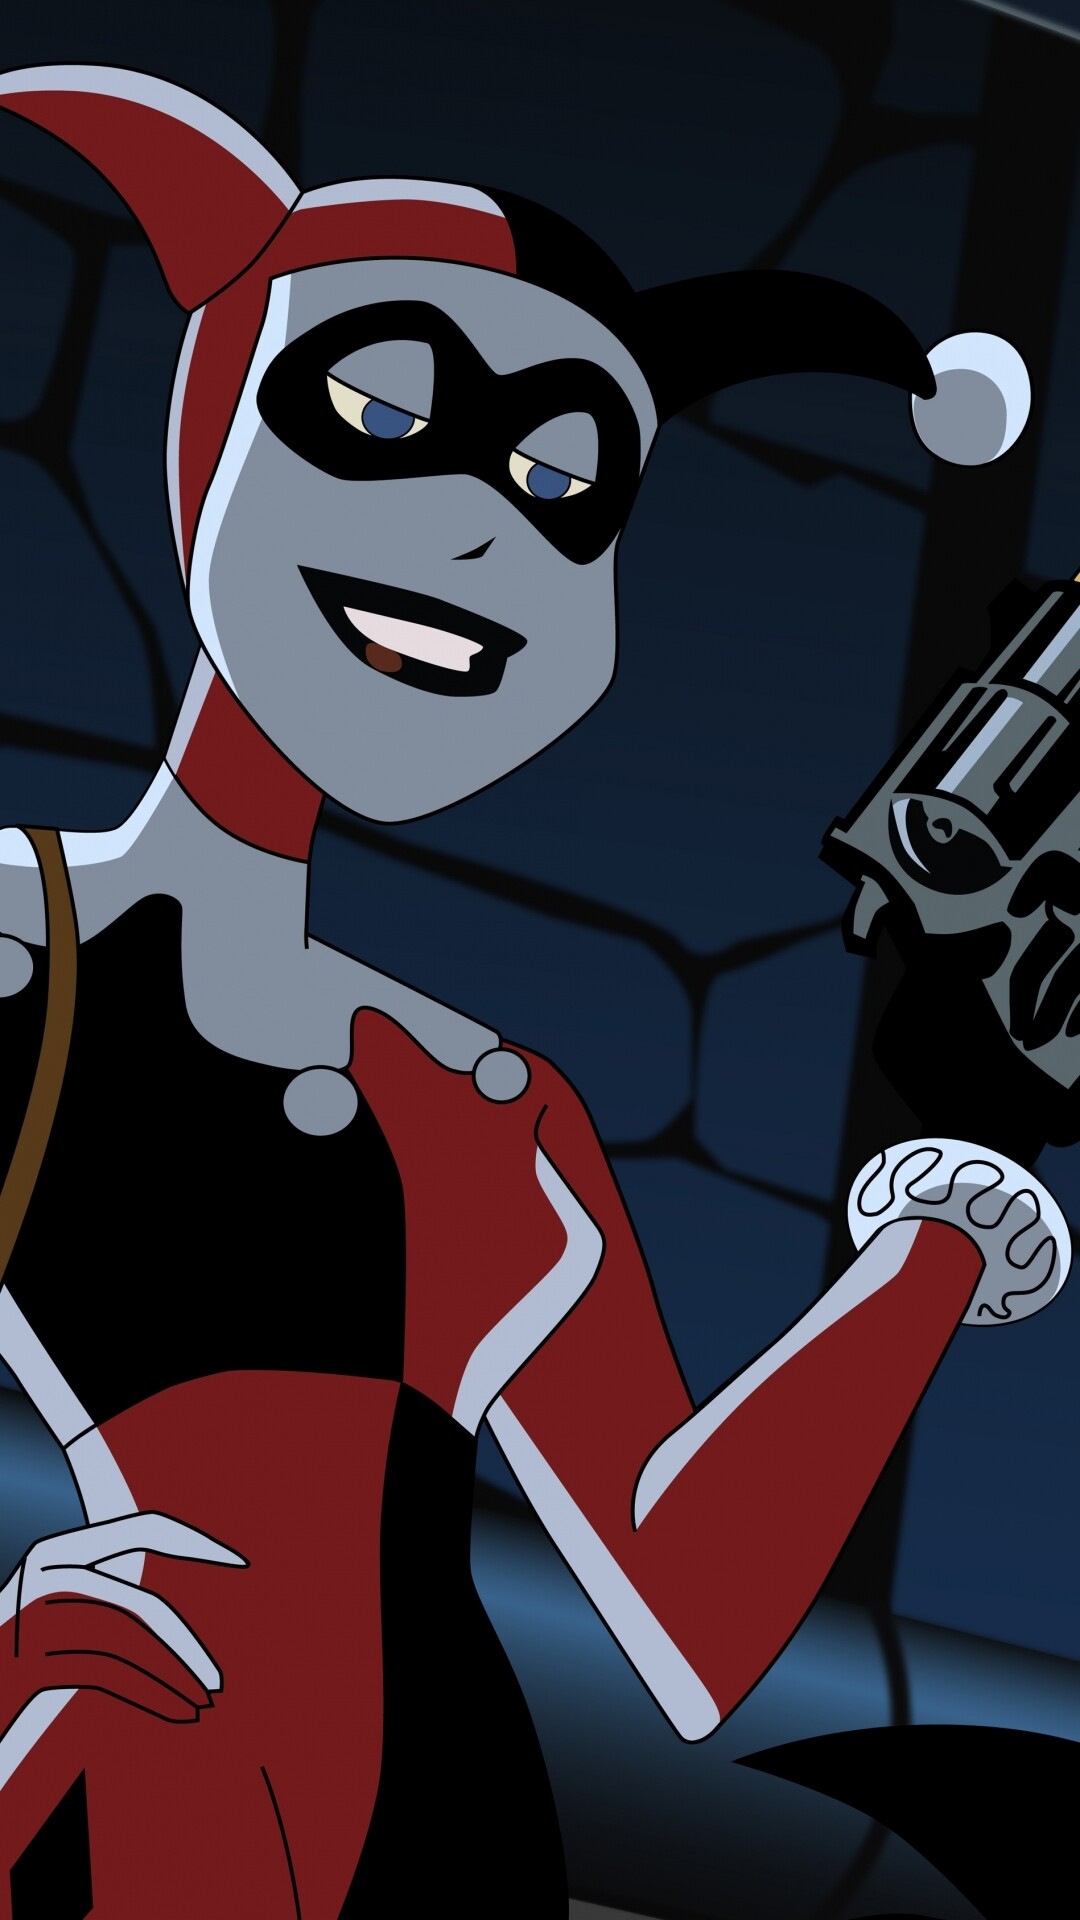 Harley Quinn: Girlfriend and sidekick to the Joker, has acted as both ally and enemy to Batman. 1080x1920 Full HD Wallpaper.